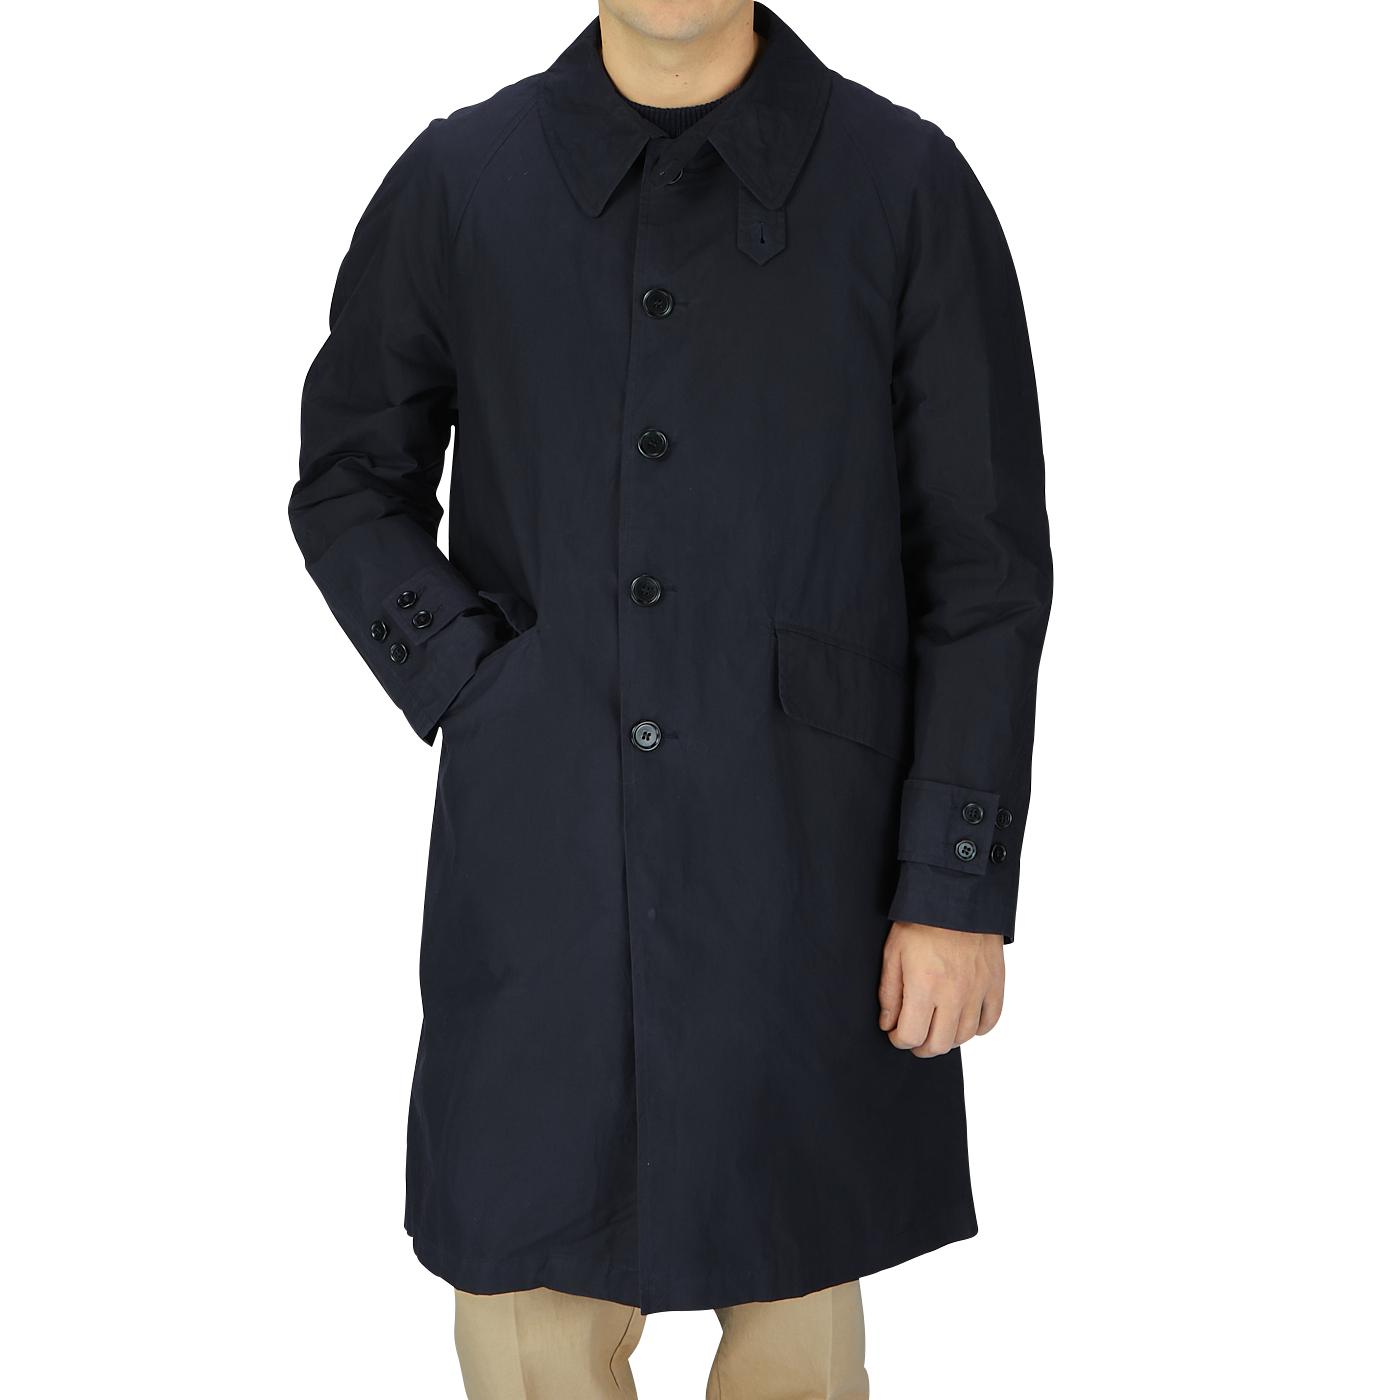 A young man wearing a Navy Blue Waxed Cotton Kamikaze trench coat from L'Impermeabile Italy.